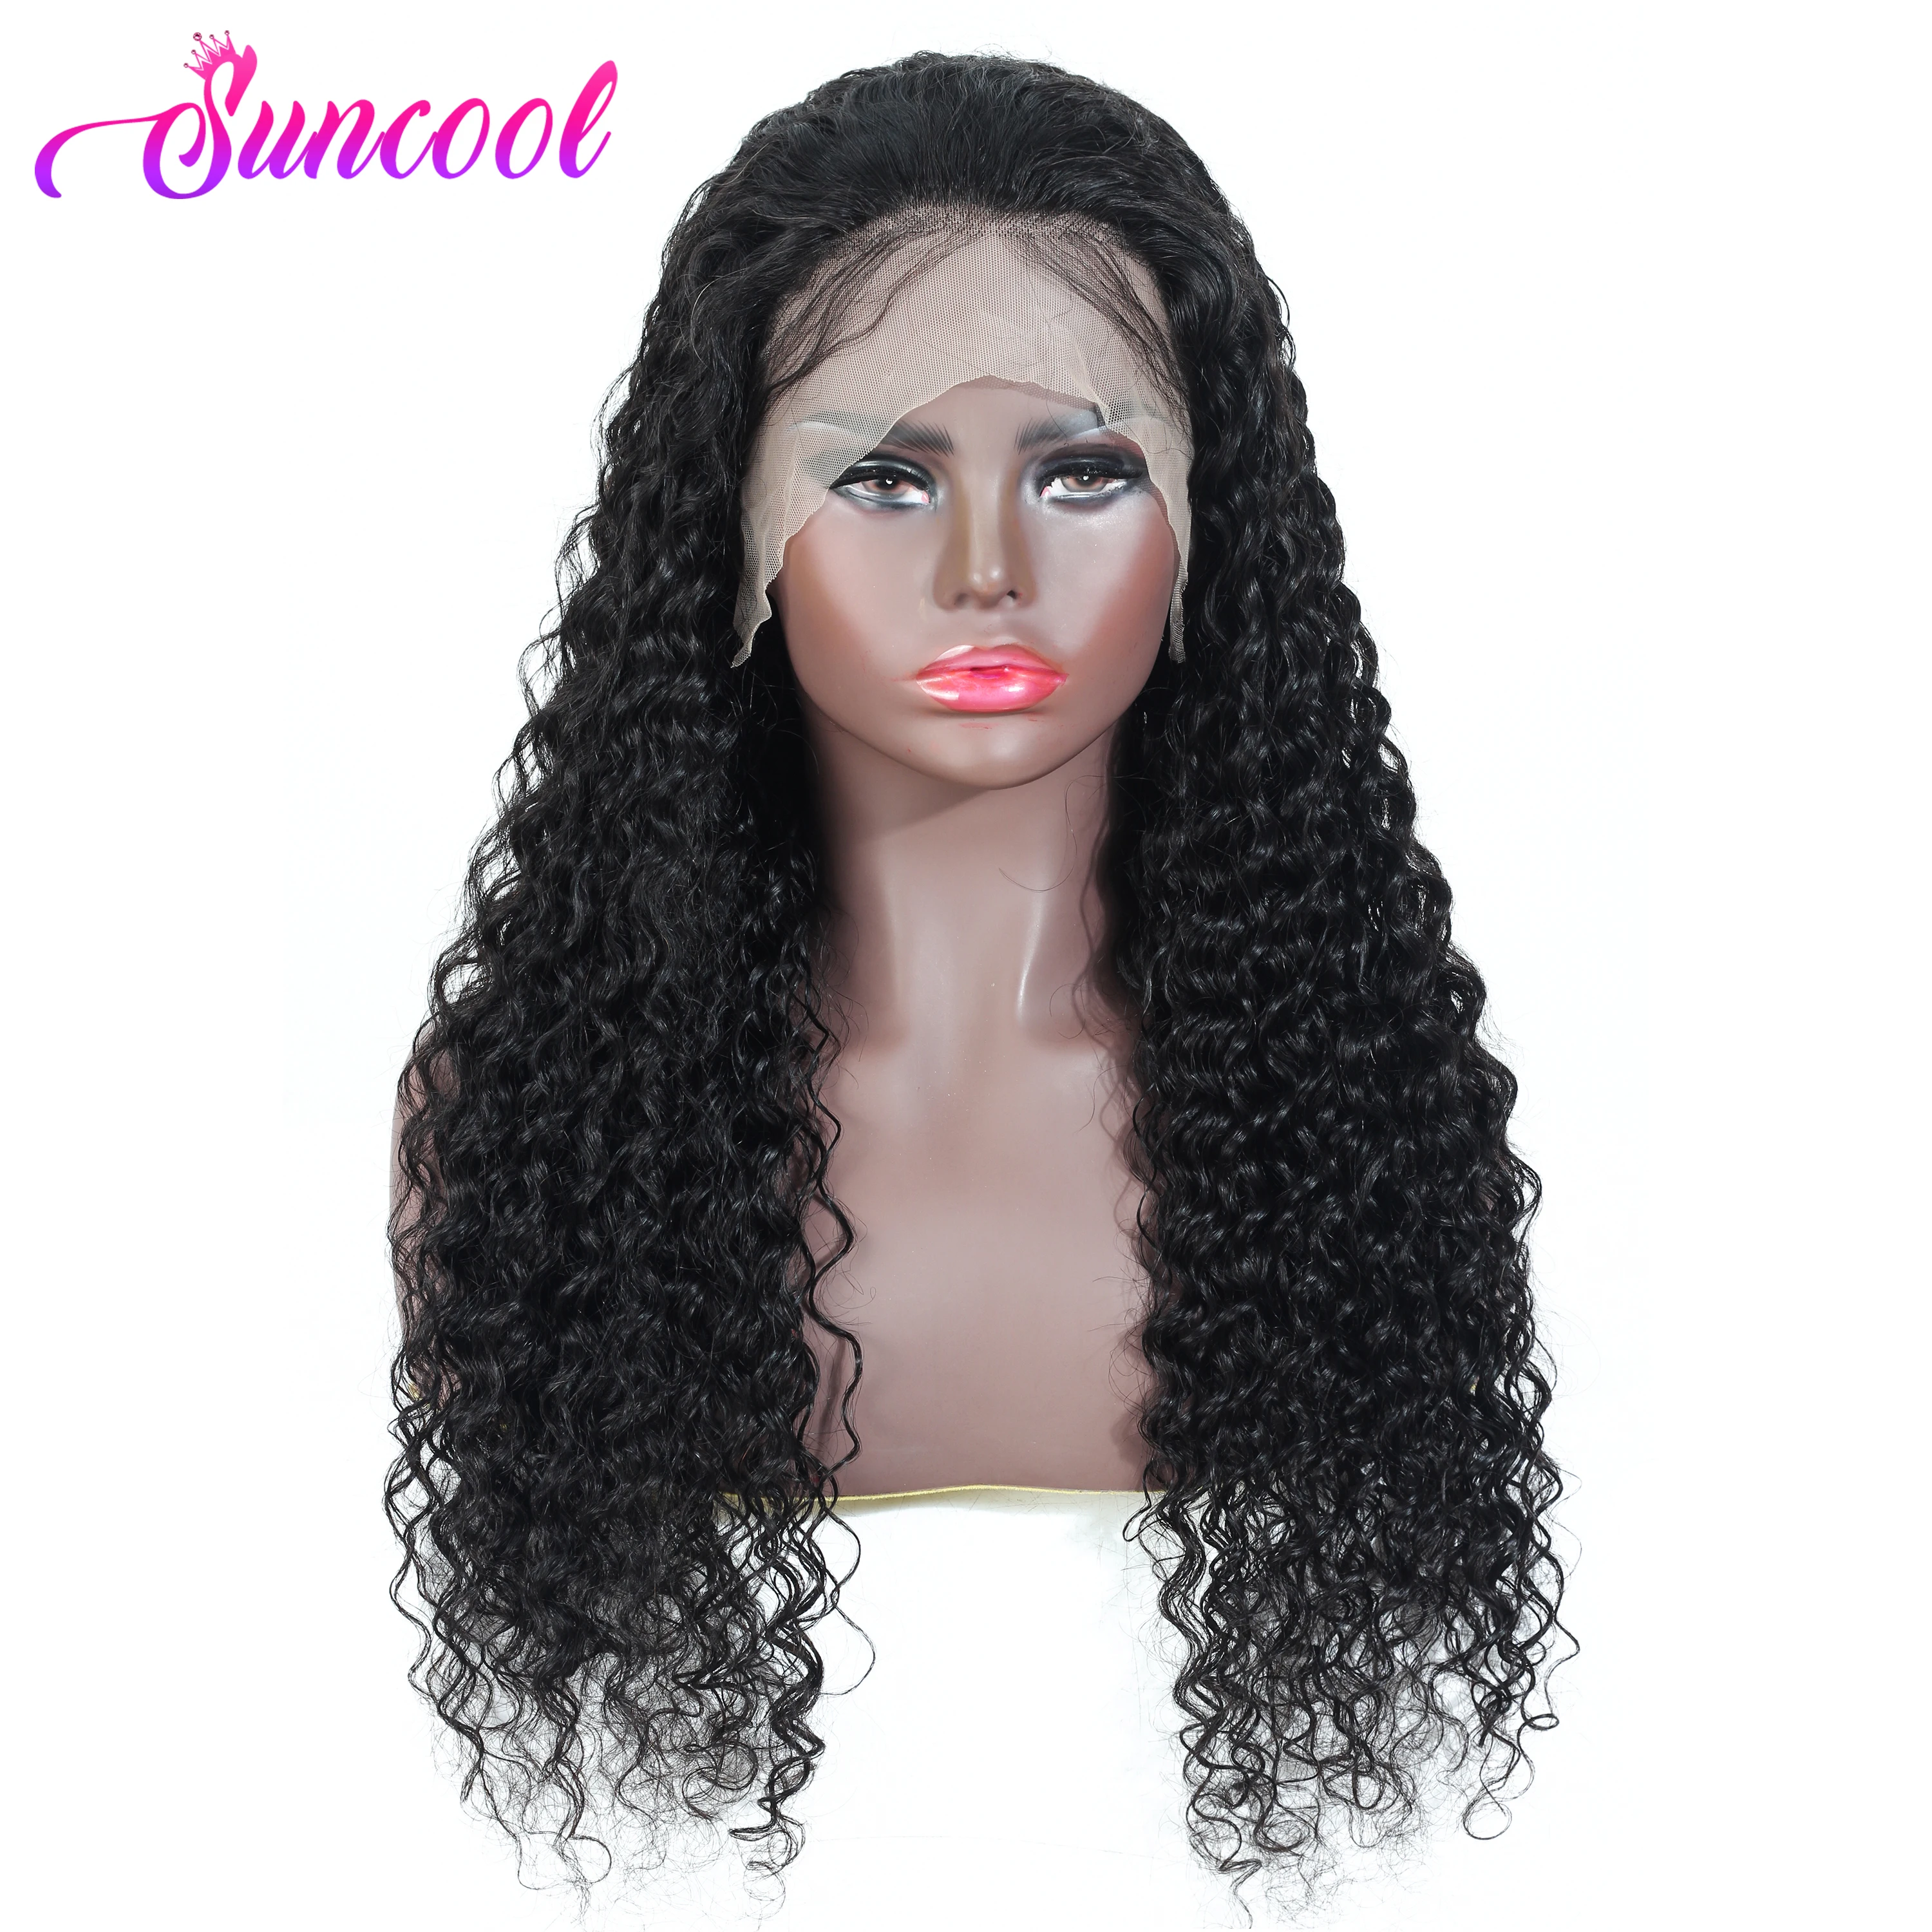 

Brazilian Deep Wave Human Hair Wigs 150% Density 13X4 Suncool Hair Deep Wave Lace Front Wig Non-remy 4x4 Lace Closure Wig